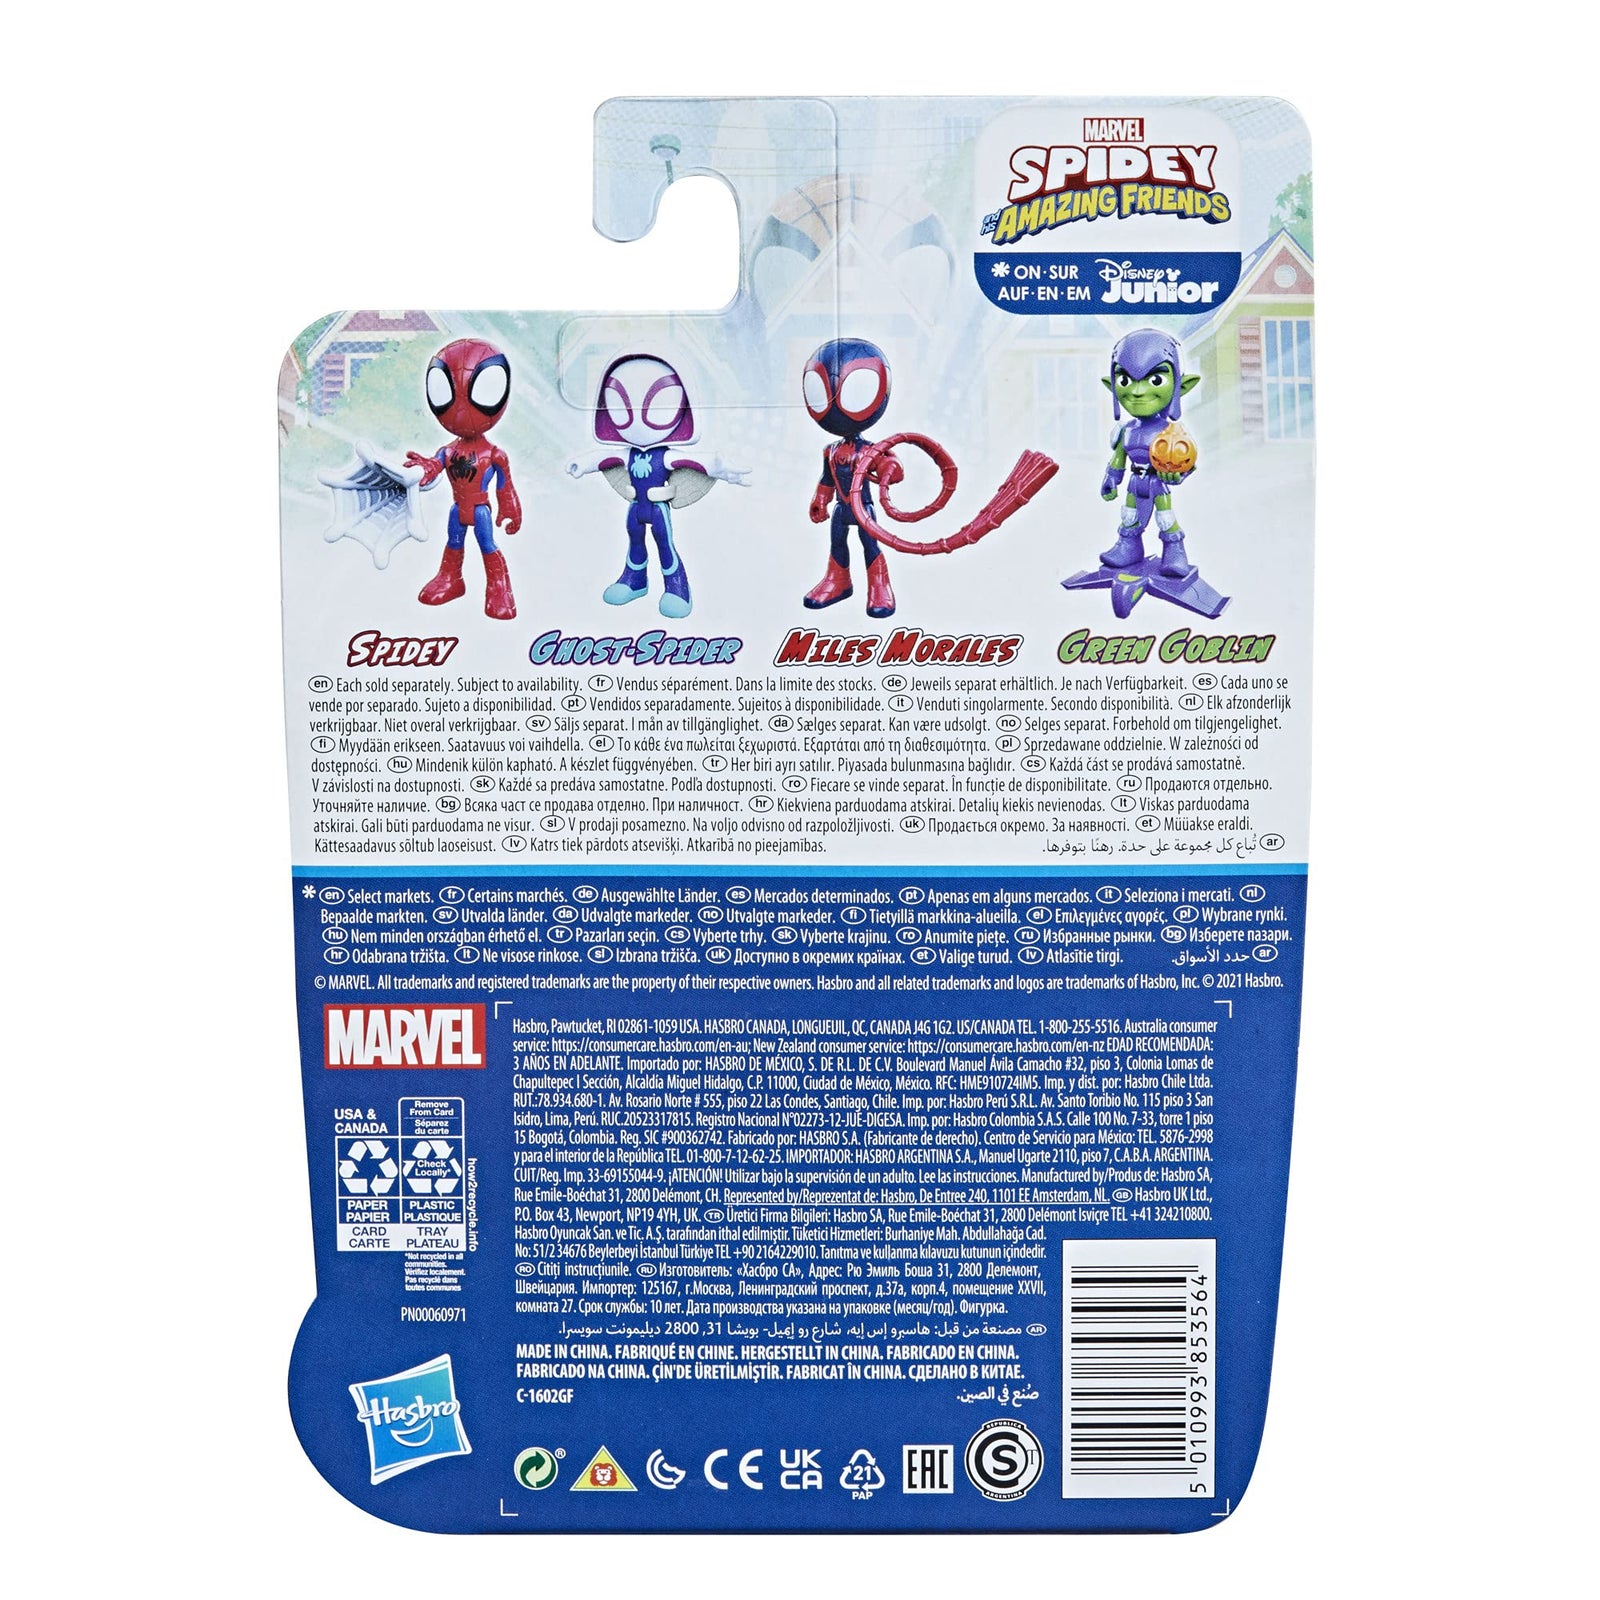 Marvel Spidey and His Amazing Friends Ghost-Spider Hero Figure, 4-Inch Scale Action Figure, Includes 1 Accessory, for Kids Ages 3 and Up